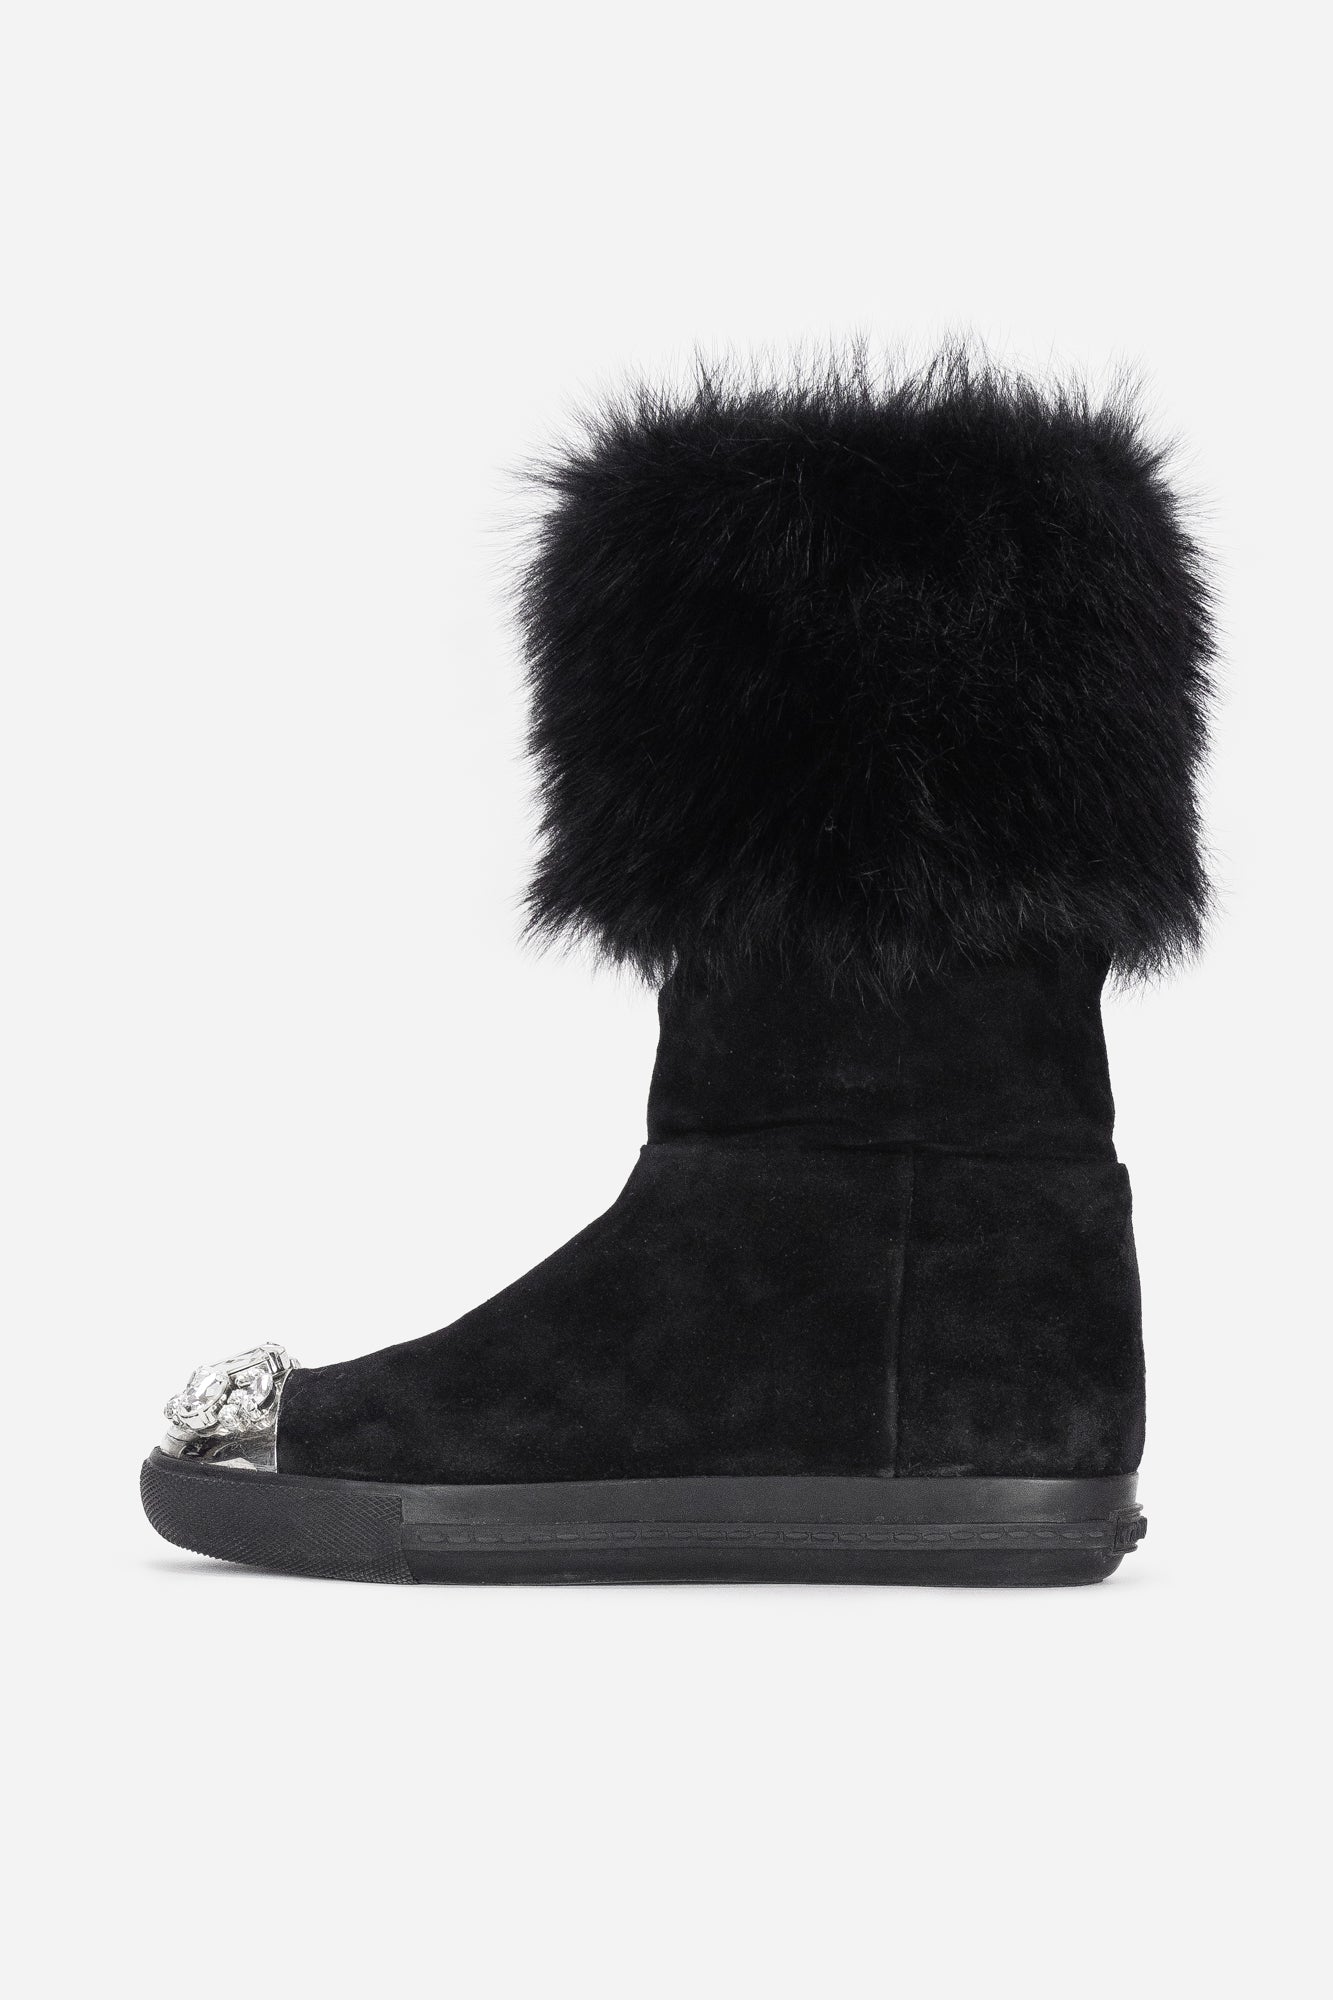 Black Suede and Shearling Crystal Embellished Boots - So Over It Luxury Consignment